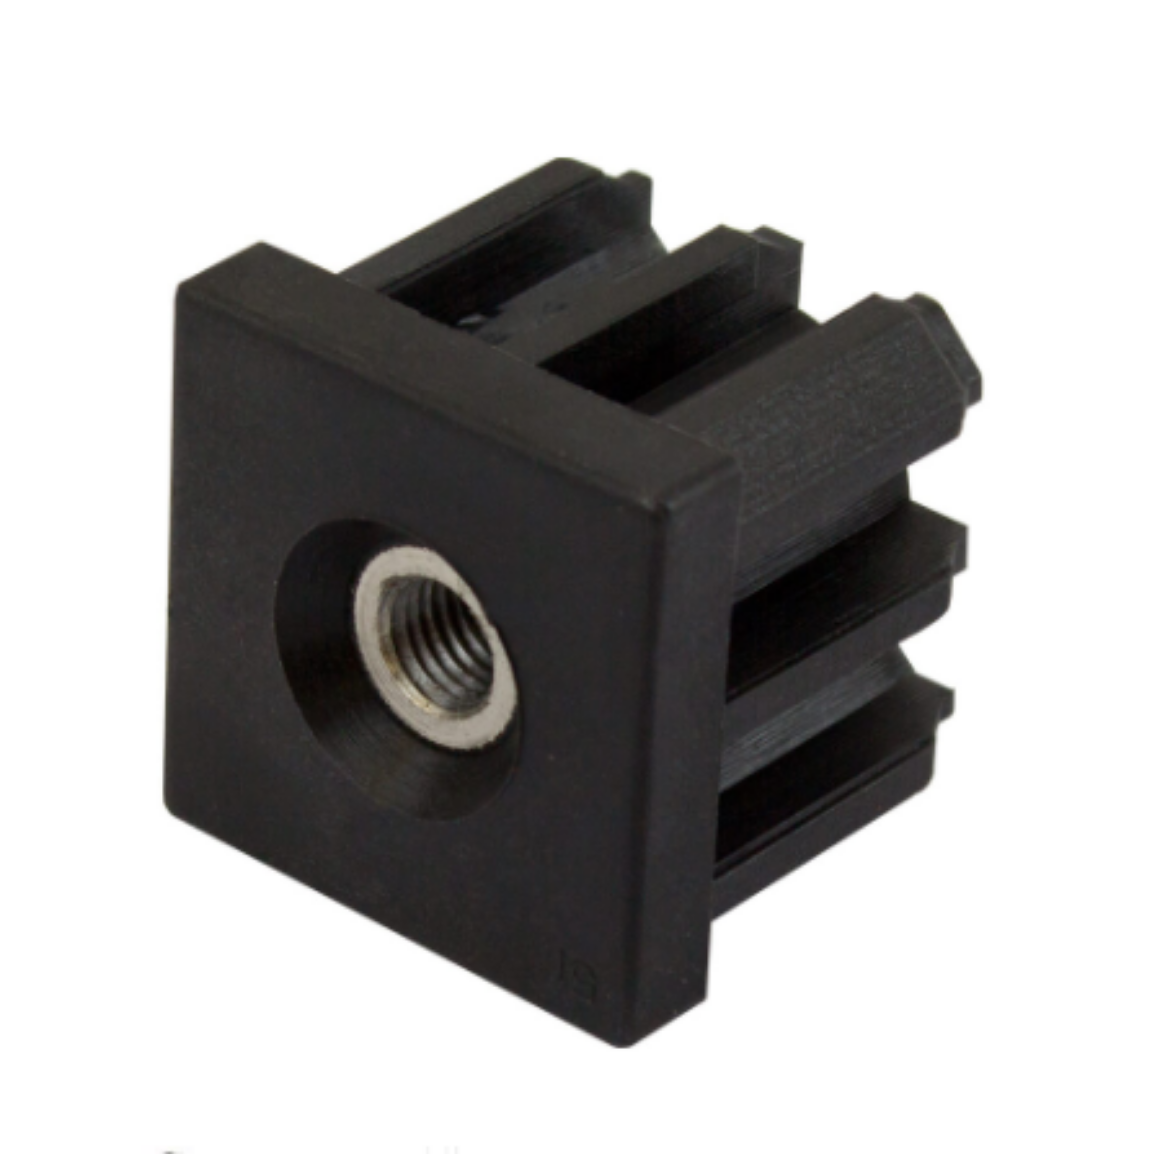 Picture of 51mm Square M12 Threaded Tube End Mild Steel (TIR51SQM12)